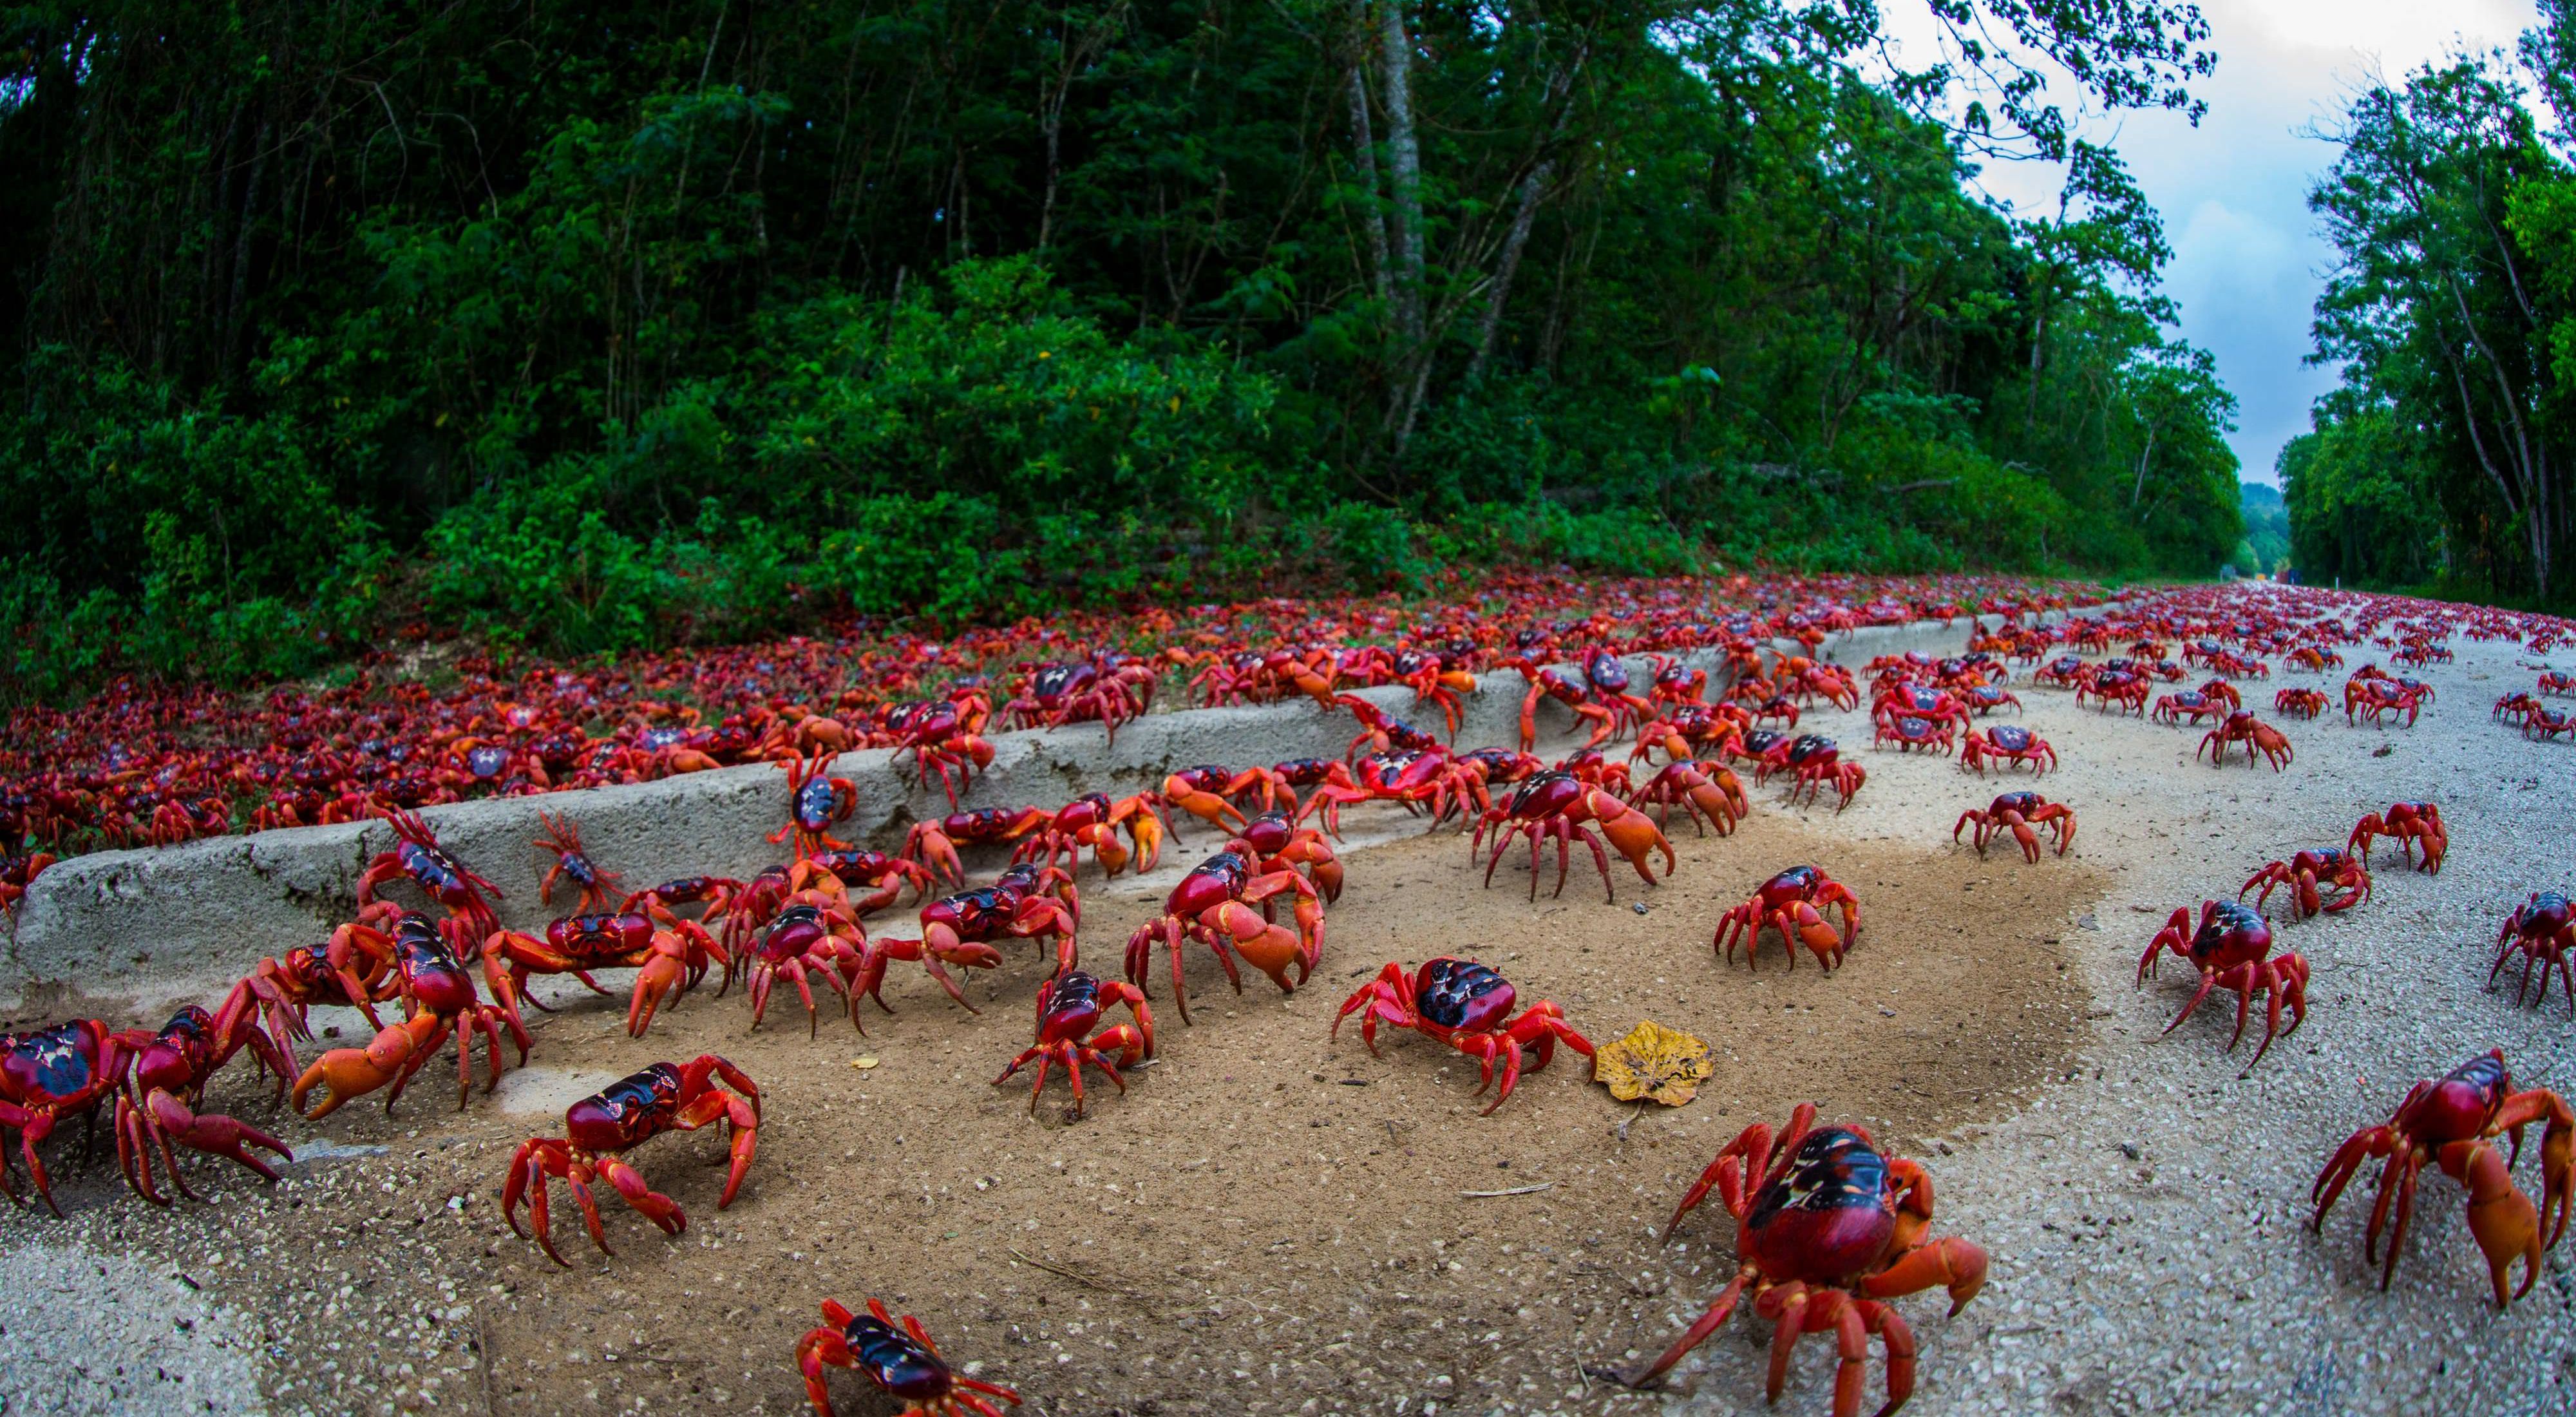 The annual migration of millions of these land crabs to the sea to spawn is one of the world’s great wildlife spectacles